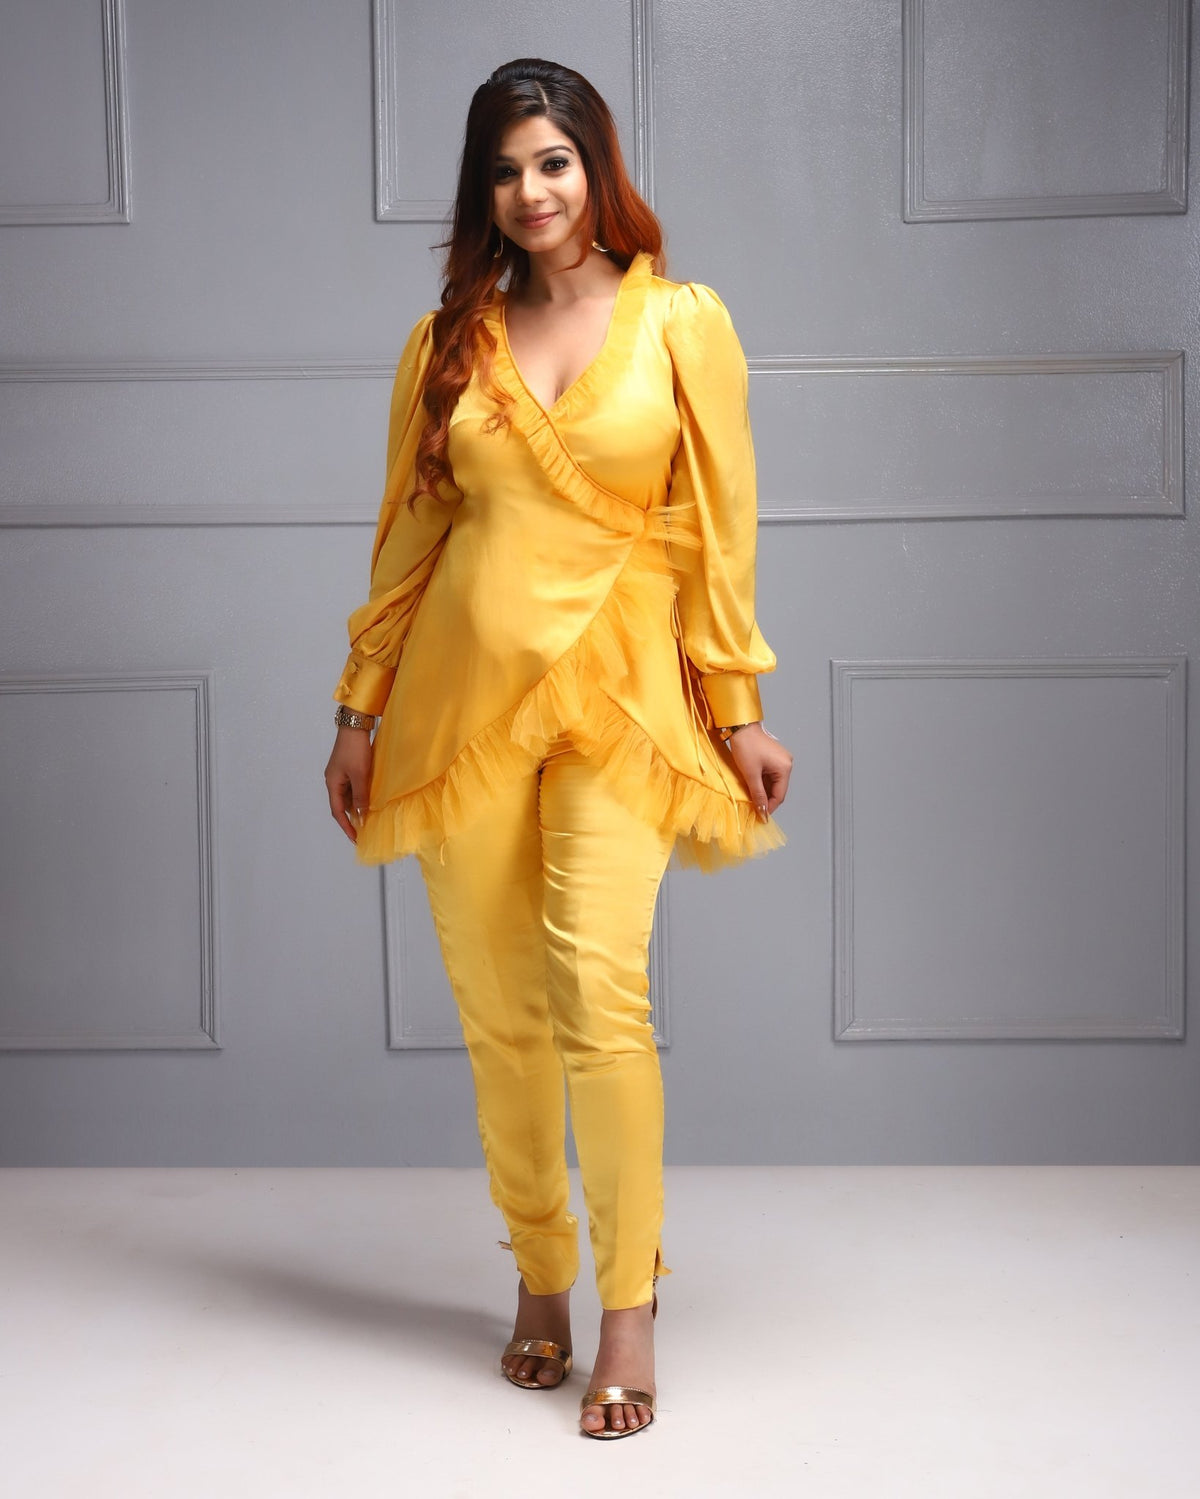 Co-ord Set  Yellow Coord Set, Peplum Top, Ruffle Detail, Wrap Style Top, Tapered Trousers, Vibrant Outfit, Fashion Statement.